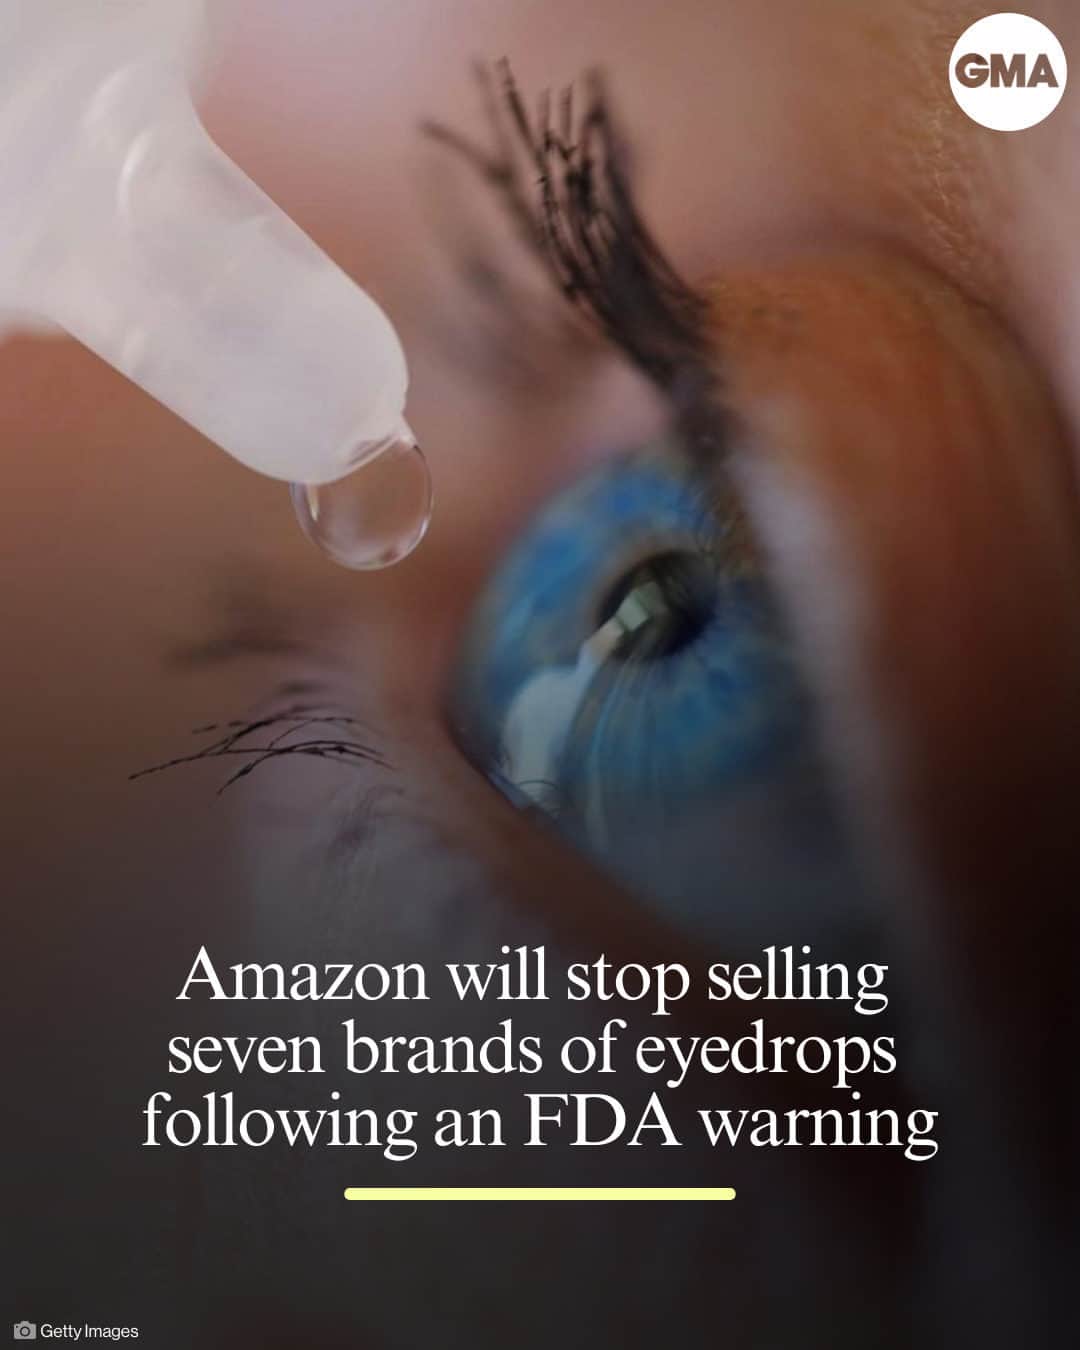 Good Morning Americaのインスタグラム：「Amazon says it will stop selling seven brands of eyedrops after the CEO received a warning letter for selling "unapproved new drugs" on the popular shopping website.  The FDA sent a letter to Andrew Jassy, Amazon’s chief executive officer, detailing the sale of products with claims to help pink eye, dry eyes and eyestrain on Amazon that the FDA says violate federal regulations.  "Safety is a top priority at Amazon. We require all products offered in our store to comply with applicable laws and regulations. The products in question have been investigated and are in the process of being removed," an Amazon spokesperson told ABC News in an emailed statement.  Visit the link in bio to read the full letter and learn more about the claims on each product.」